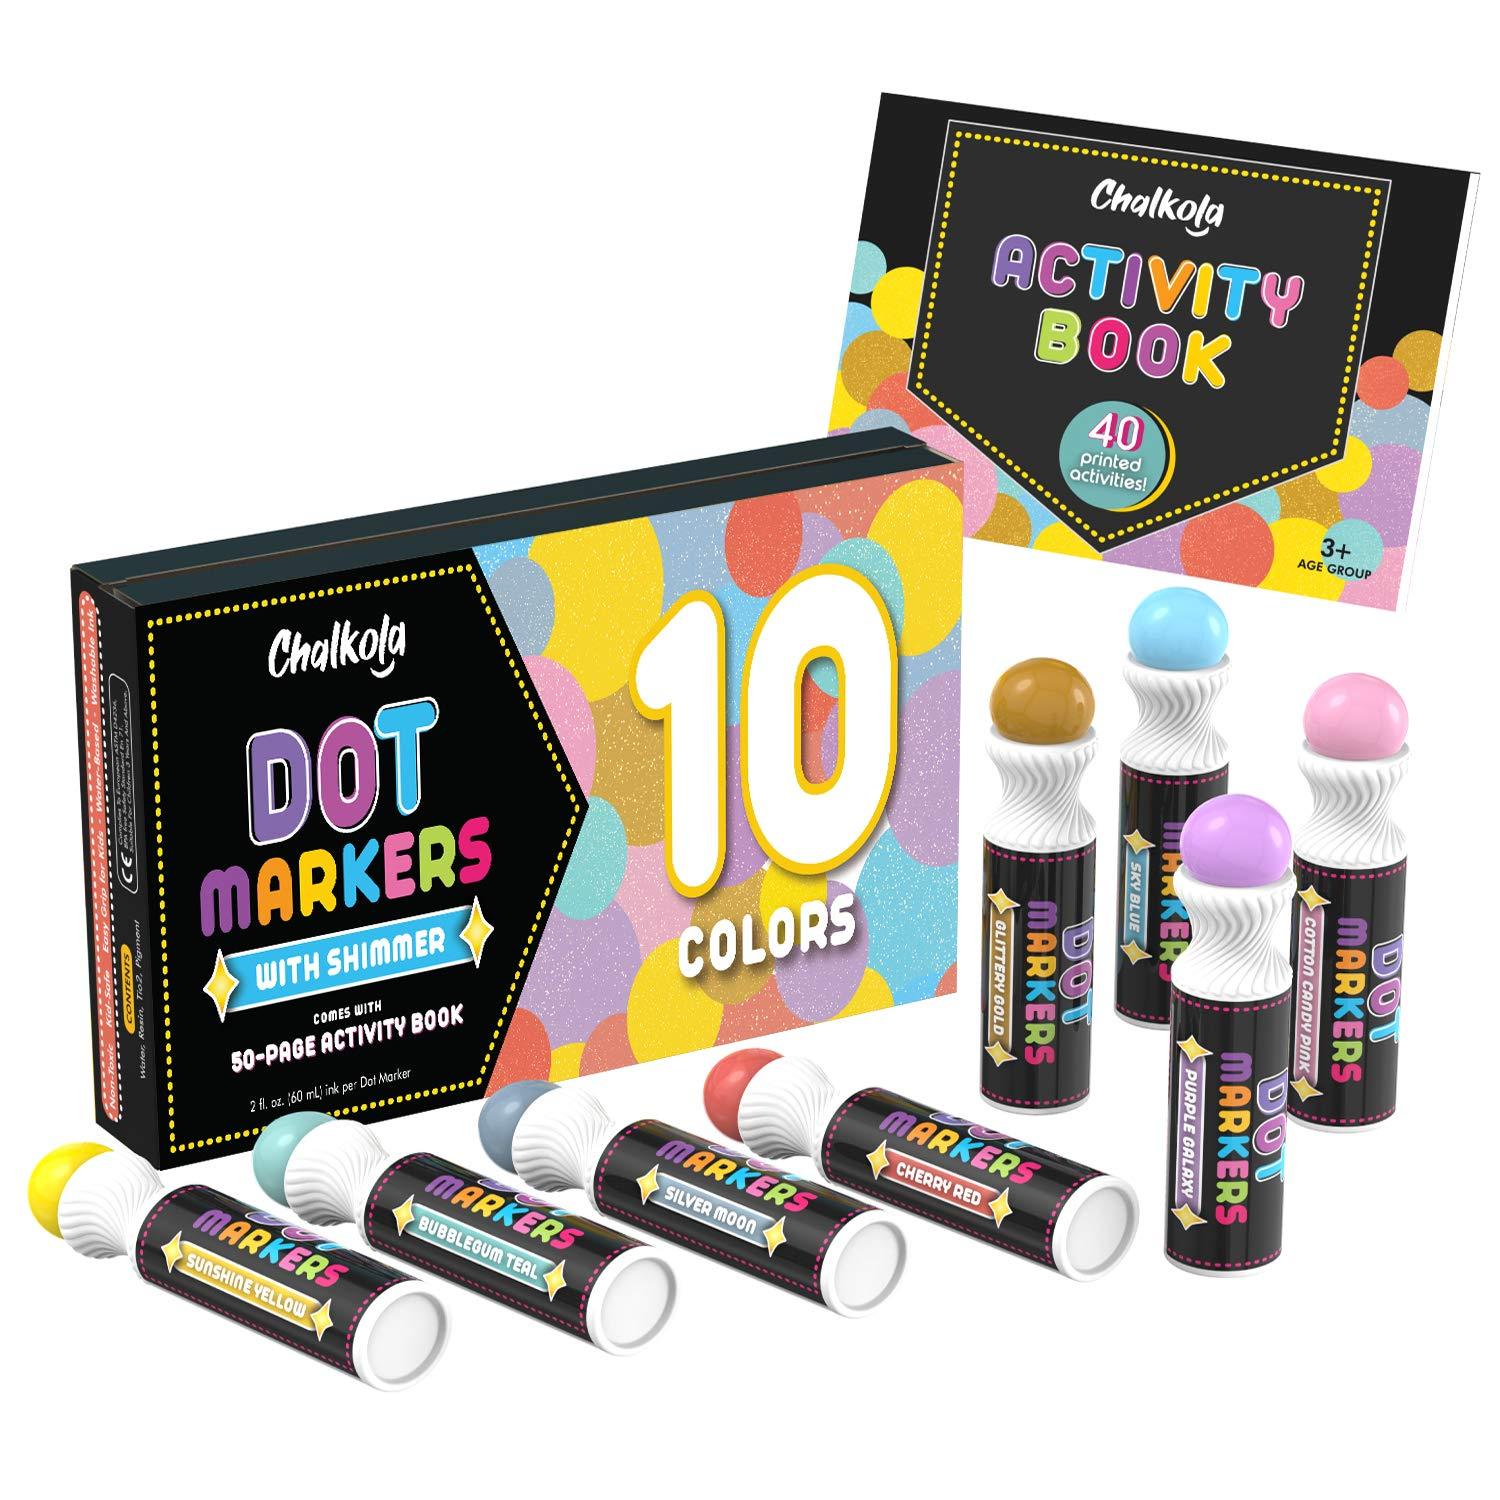 Dot Markers, Washable Dot Markers for Kids Toddlers & Preschoolers, 24  Colors Bingo Paint Daubers Marker Kit with Free Activity Book 